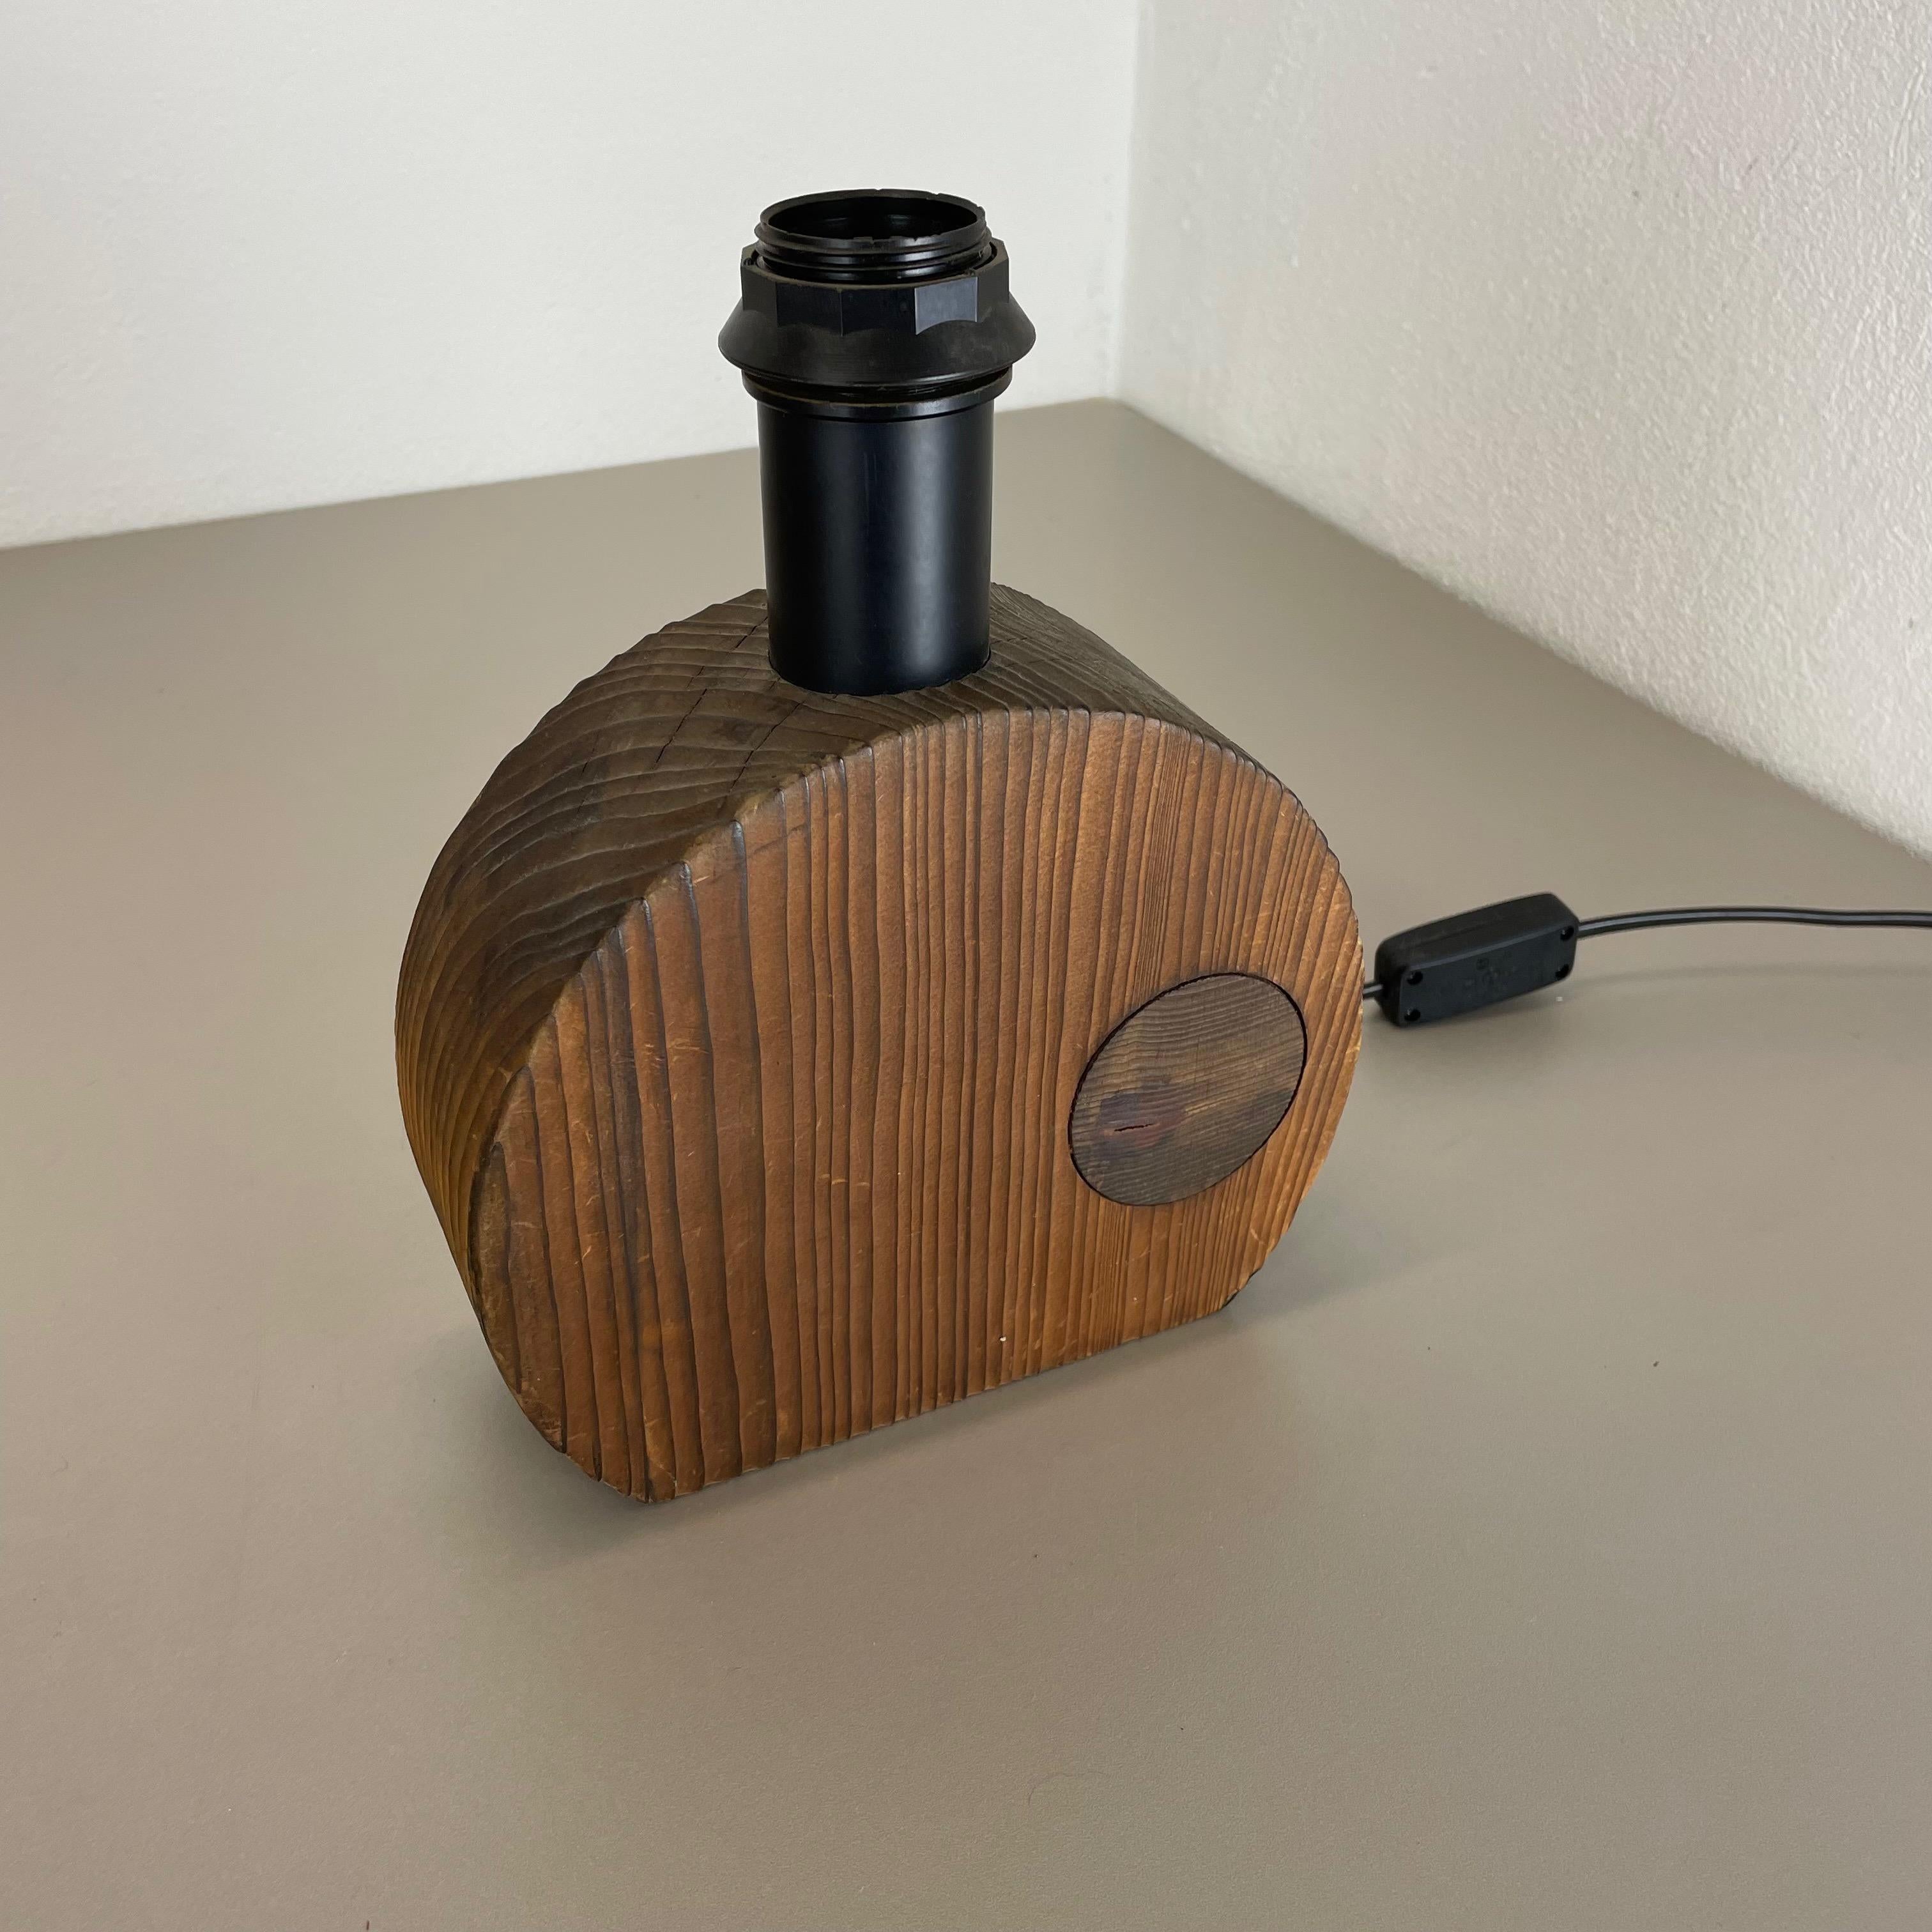 Organic Sculptural Wooden Table Light Made Temde Lights, Germany, 1970s For Sale 1